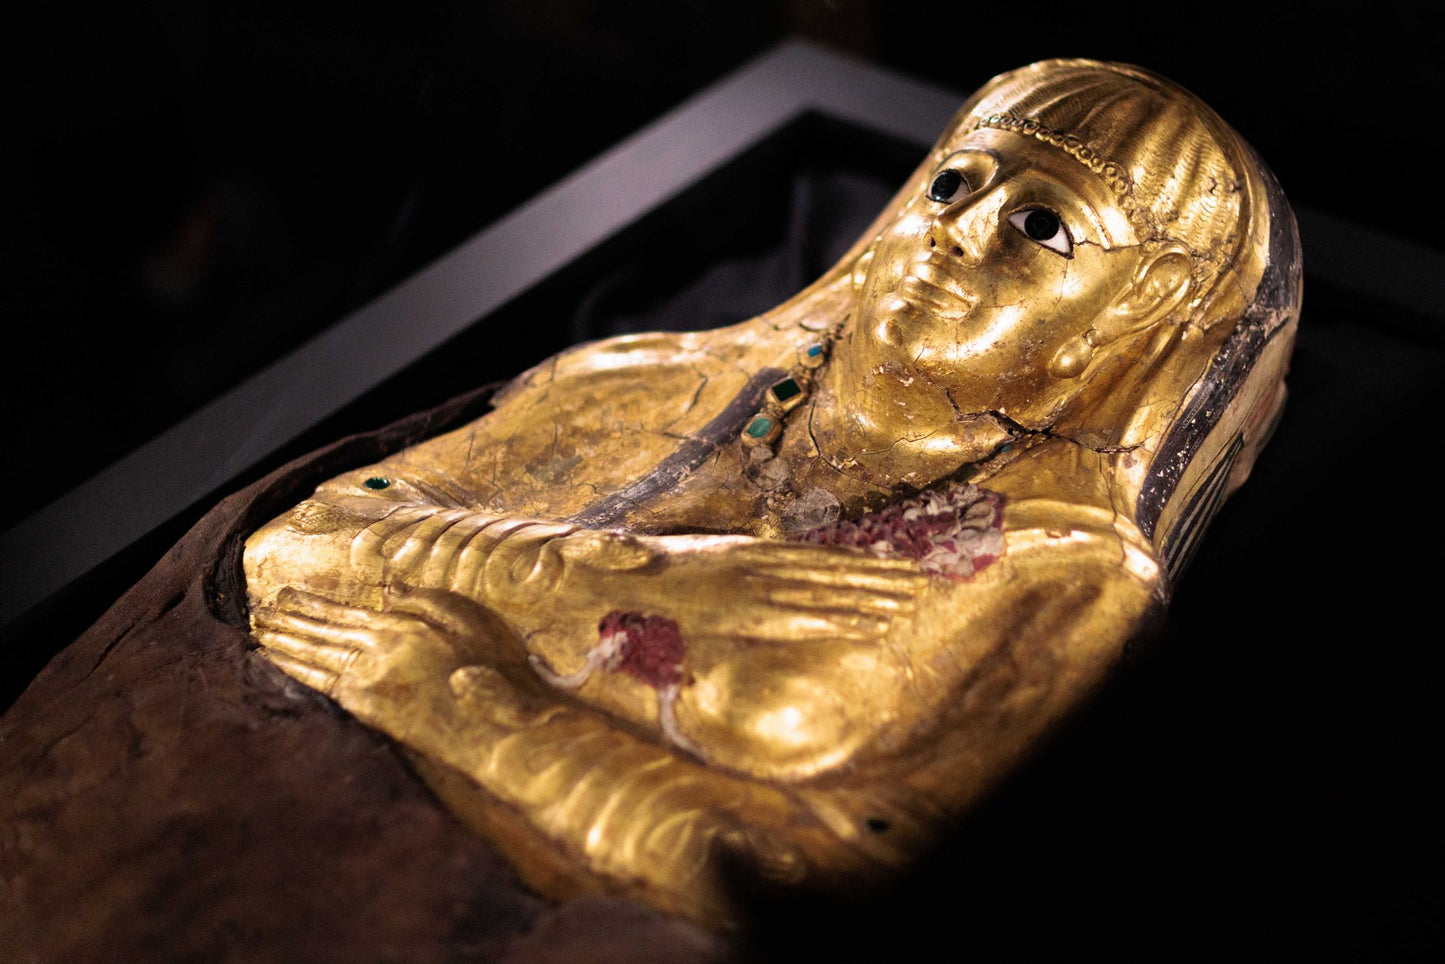 Golden mummy mask cartonage of a woman with her arms over her chest, the left arm is higher up and the right arm reaches straight across her body. Snake shaped bracelets are on her arms.